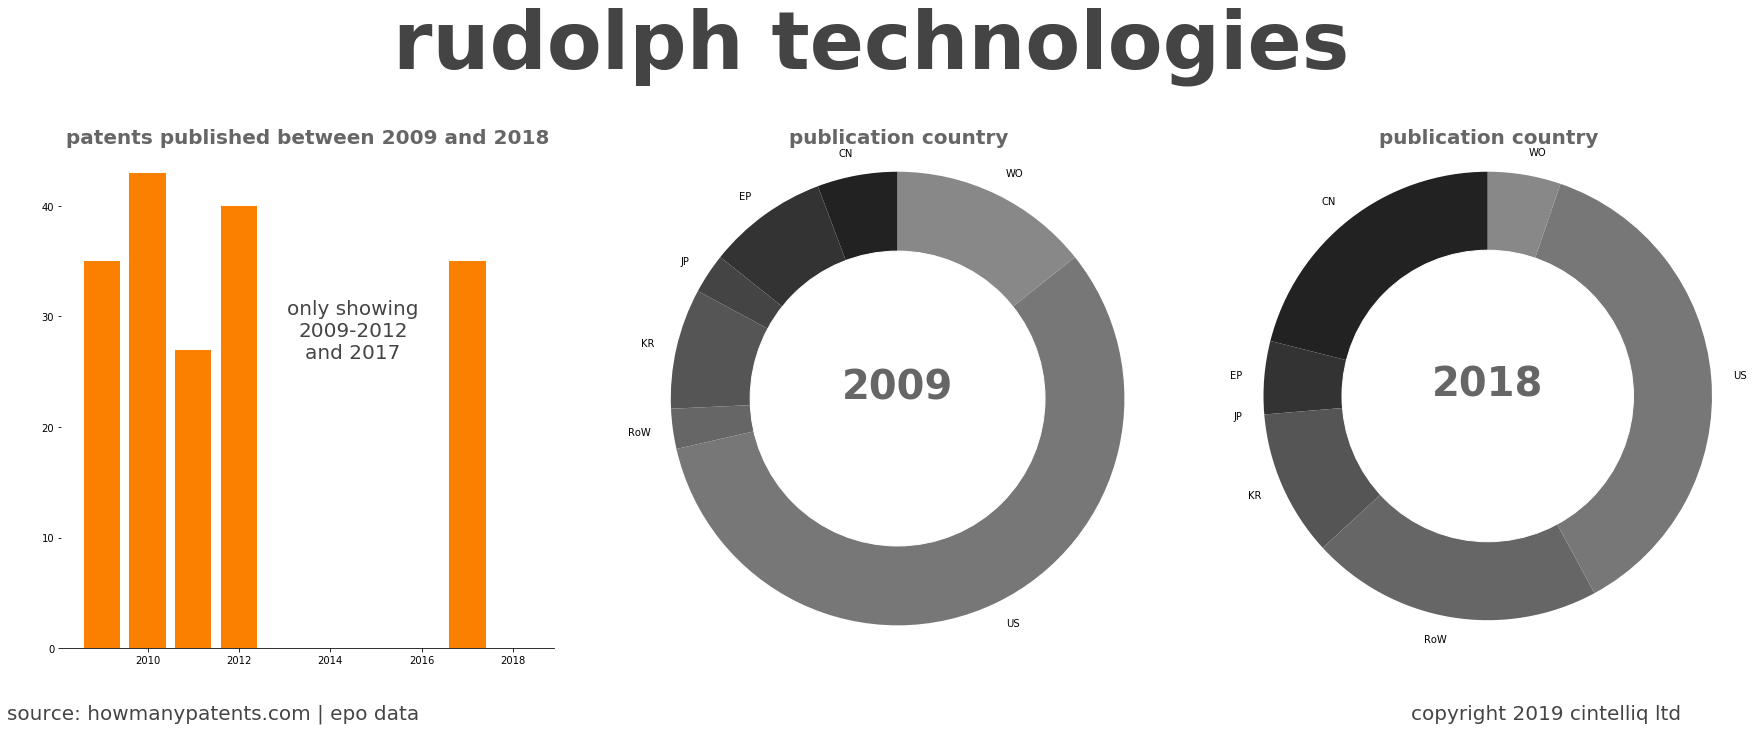 summary of patents for Rudolph Technologies